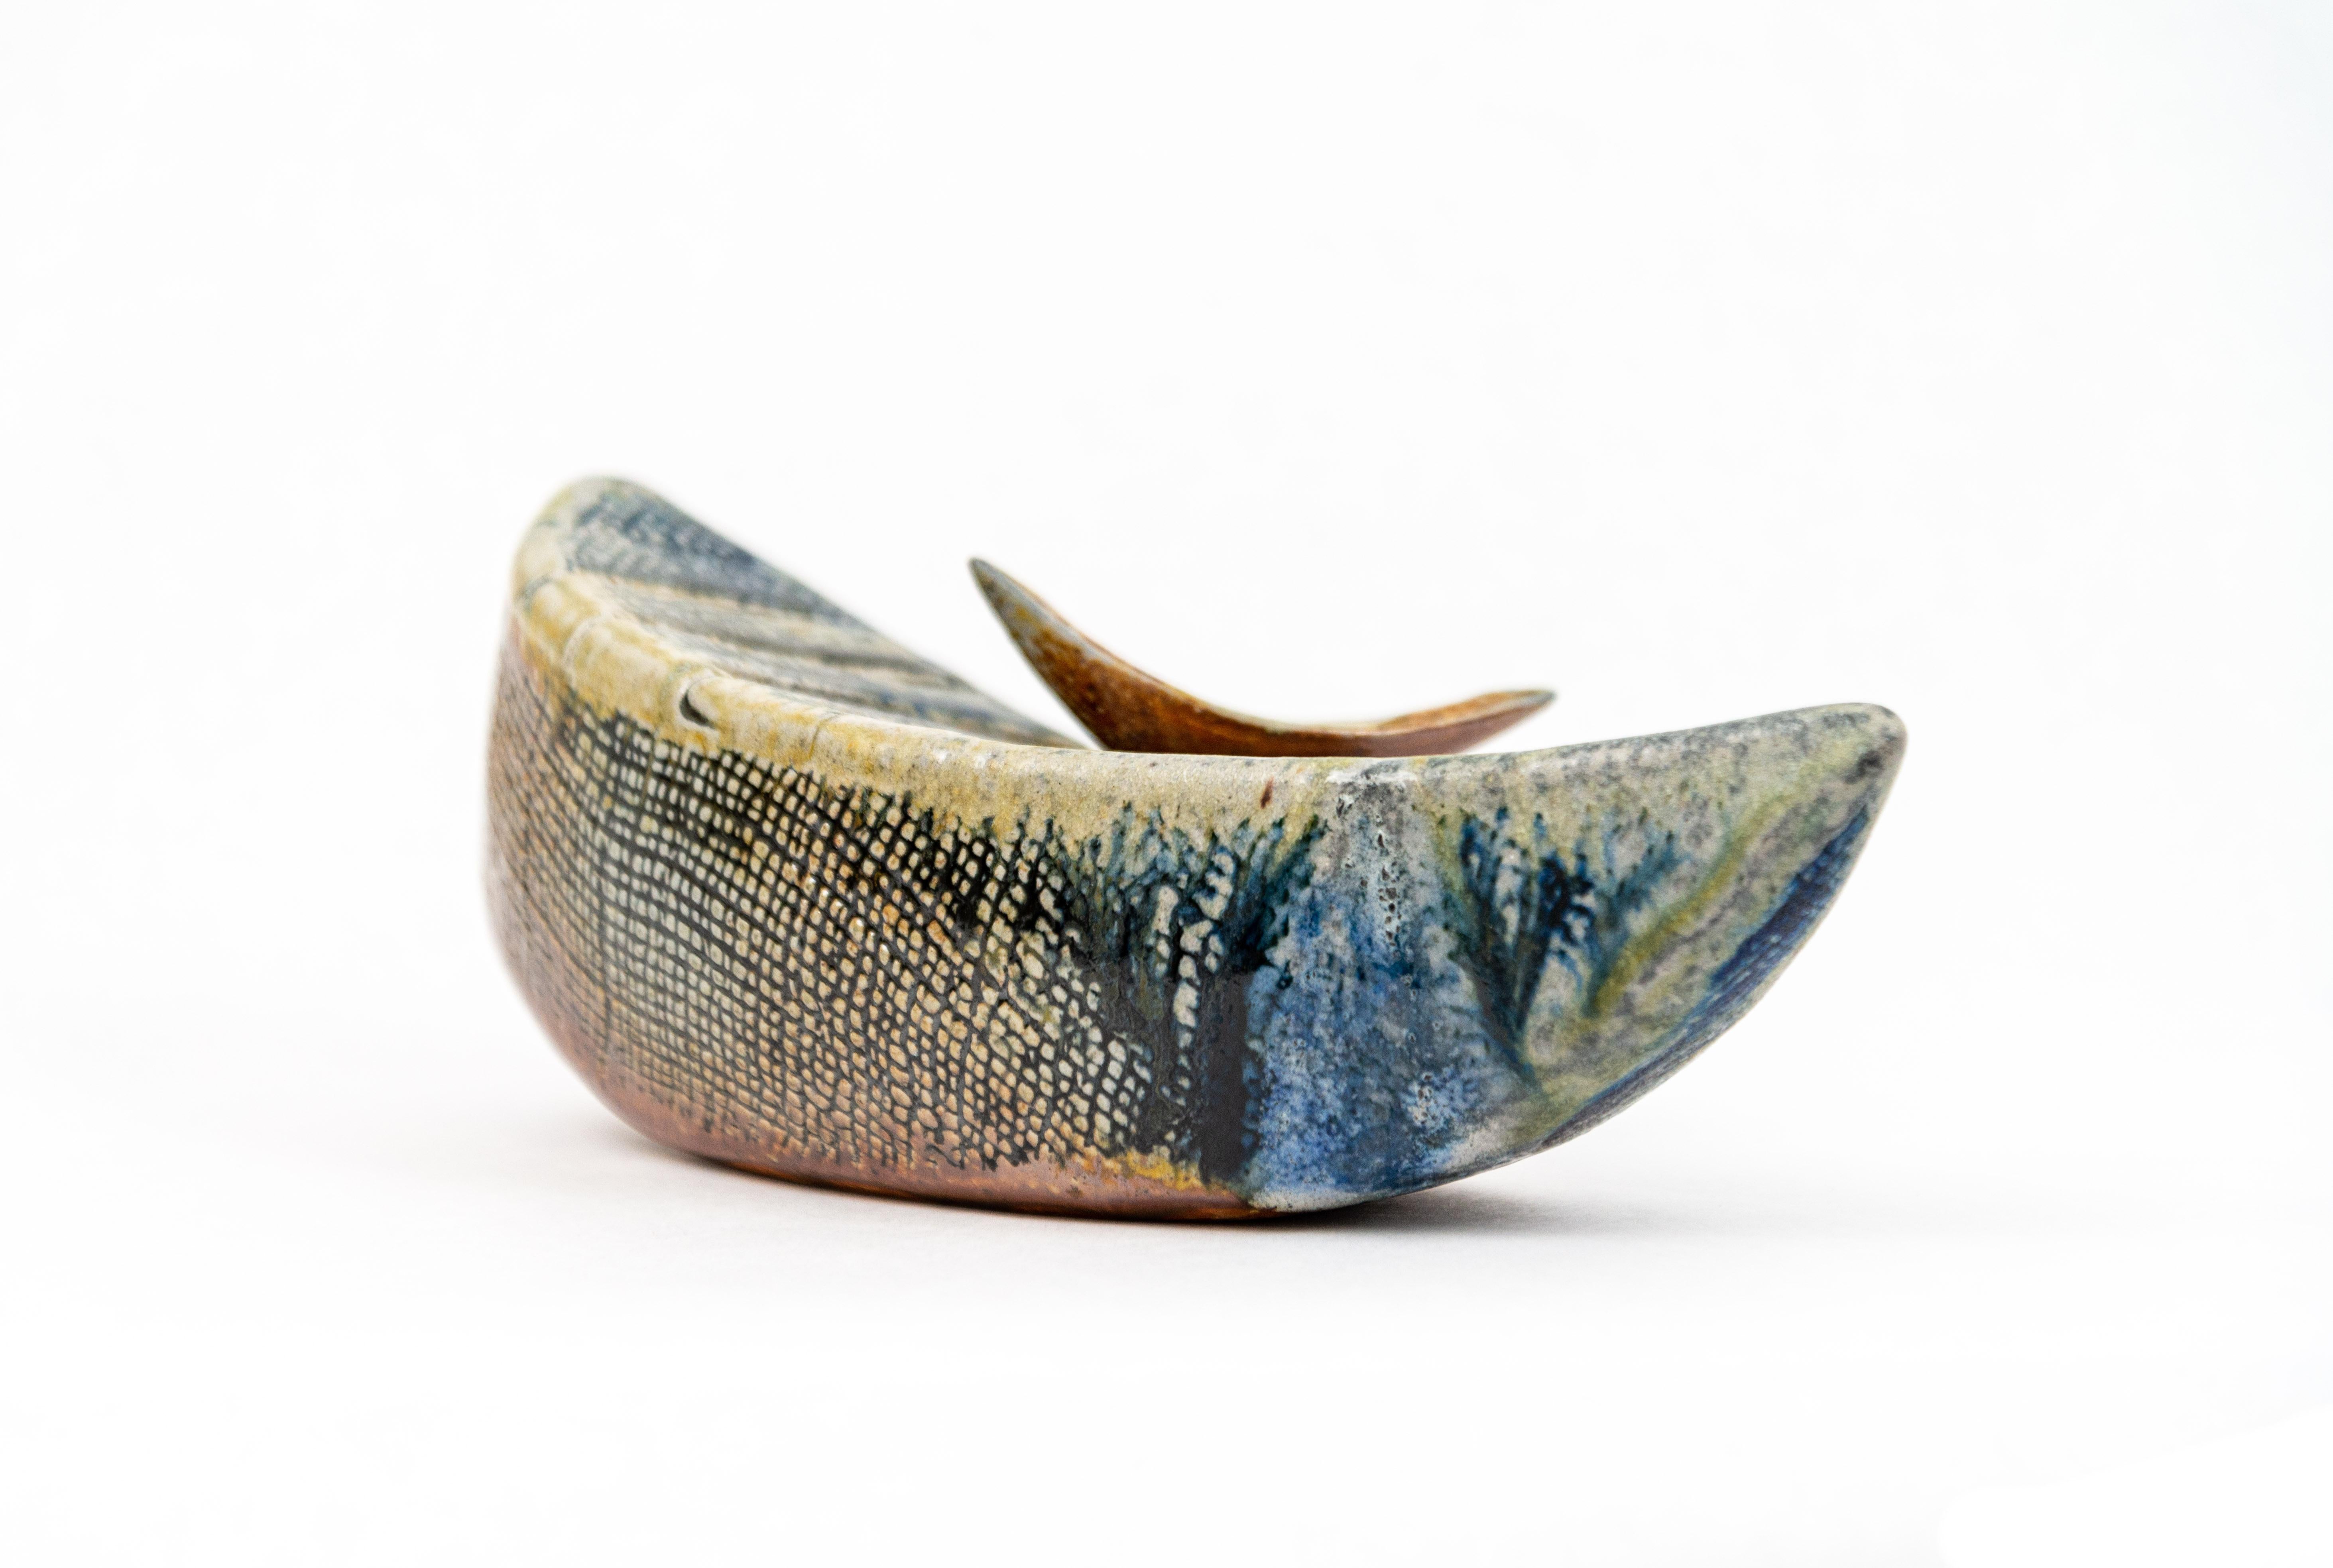 Ethereal. Beautiful. Heather Allen Hietala’s series of ceramic vessels are hand built from clay, formed and fired into boat-like shapes. For Hietala, the vessel is symbolic of life’s journey. The shining fragments of glass from recycled pickle jars